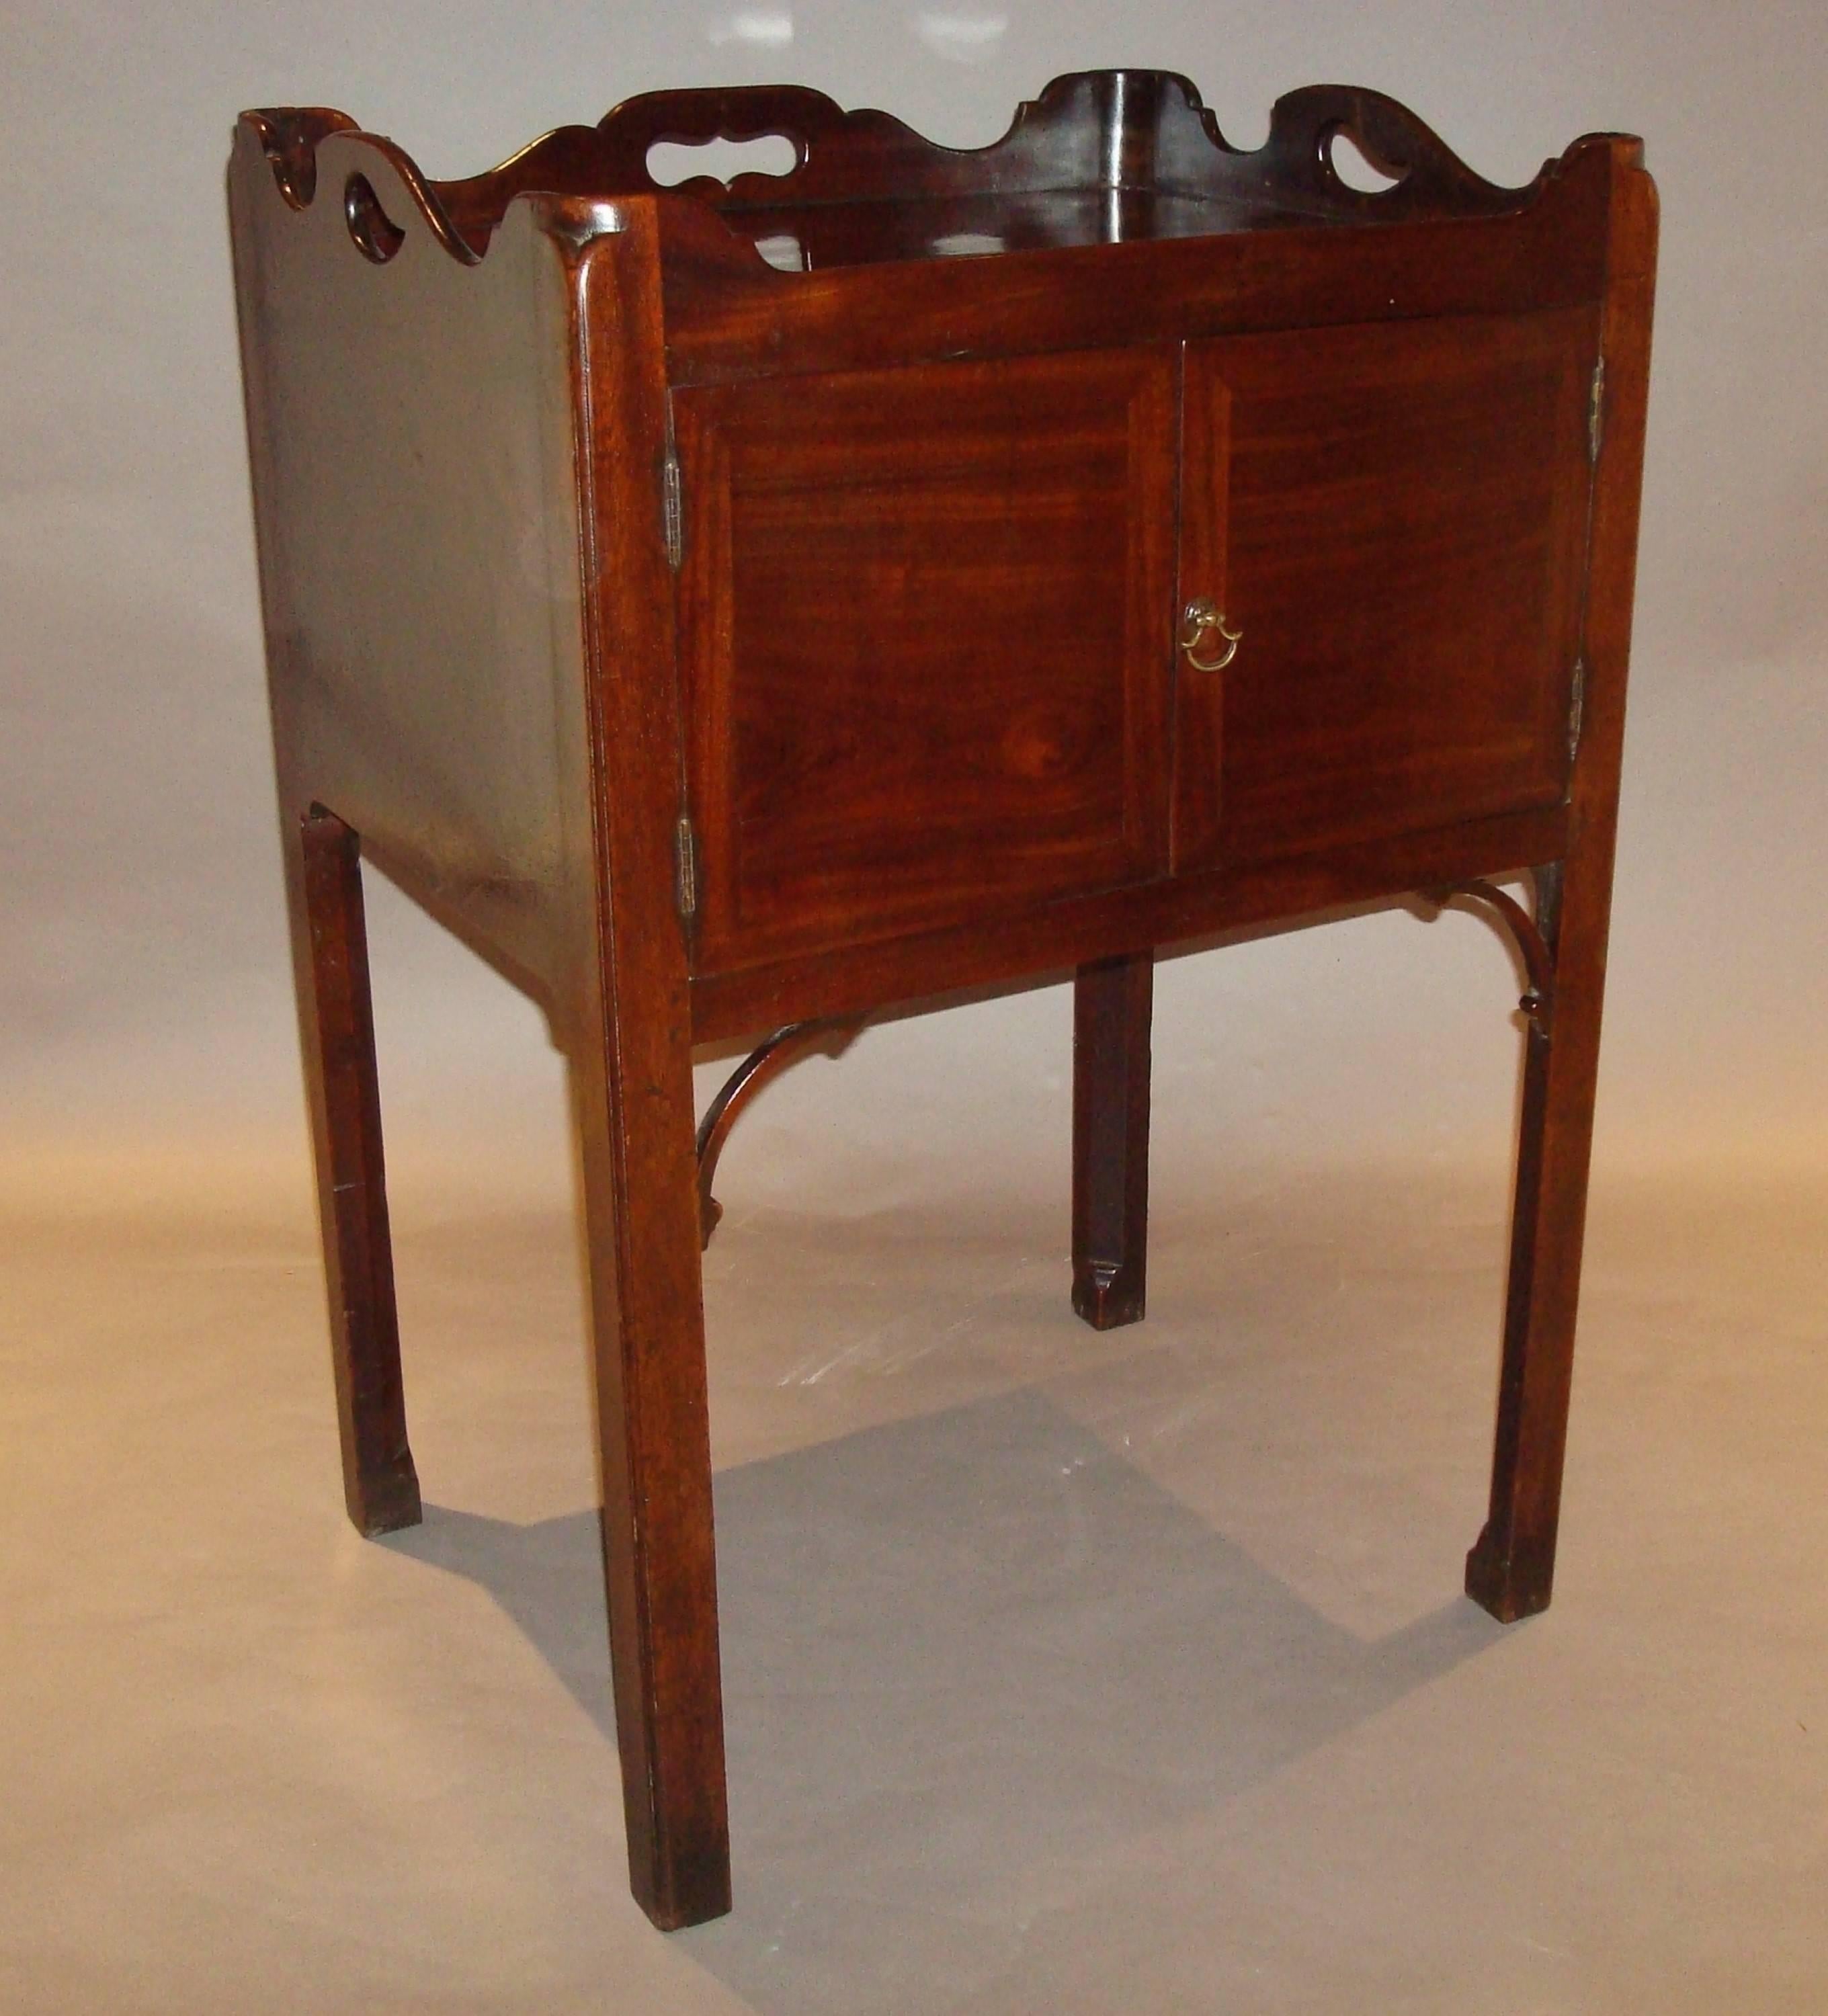 An excellent example of a Georgian mahogany 'Chippendale' tray top bedside cabinet. The well figured top with exaggerated shaped three quarter gallery incorporating pierced handle grips, supported in re-entrant shaped cornered uprights. The well